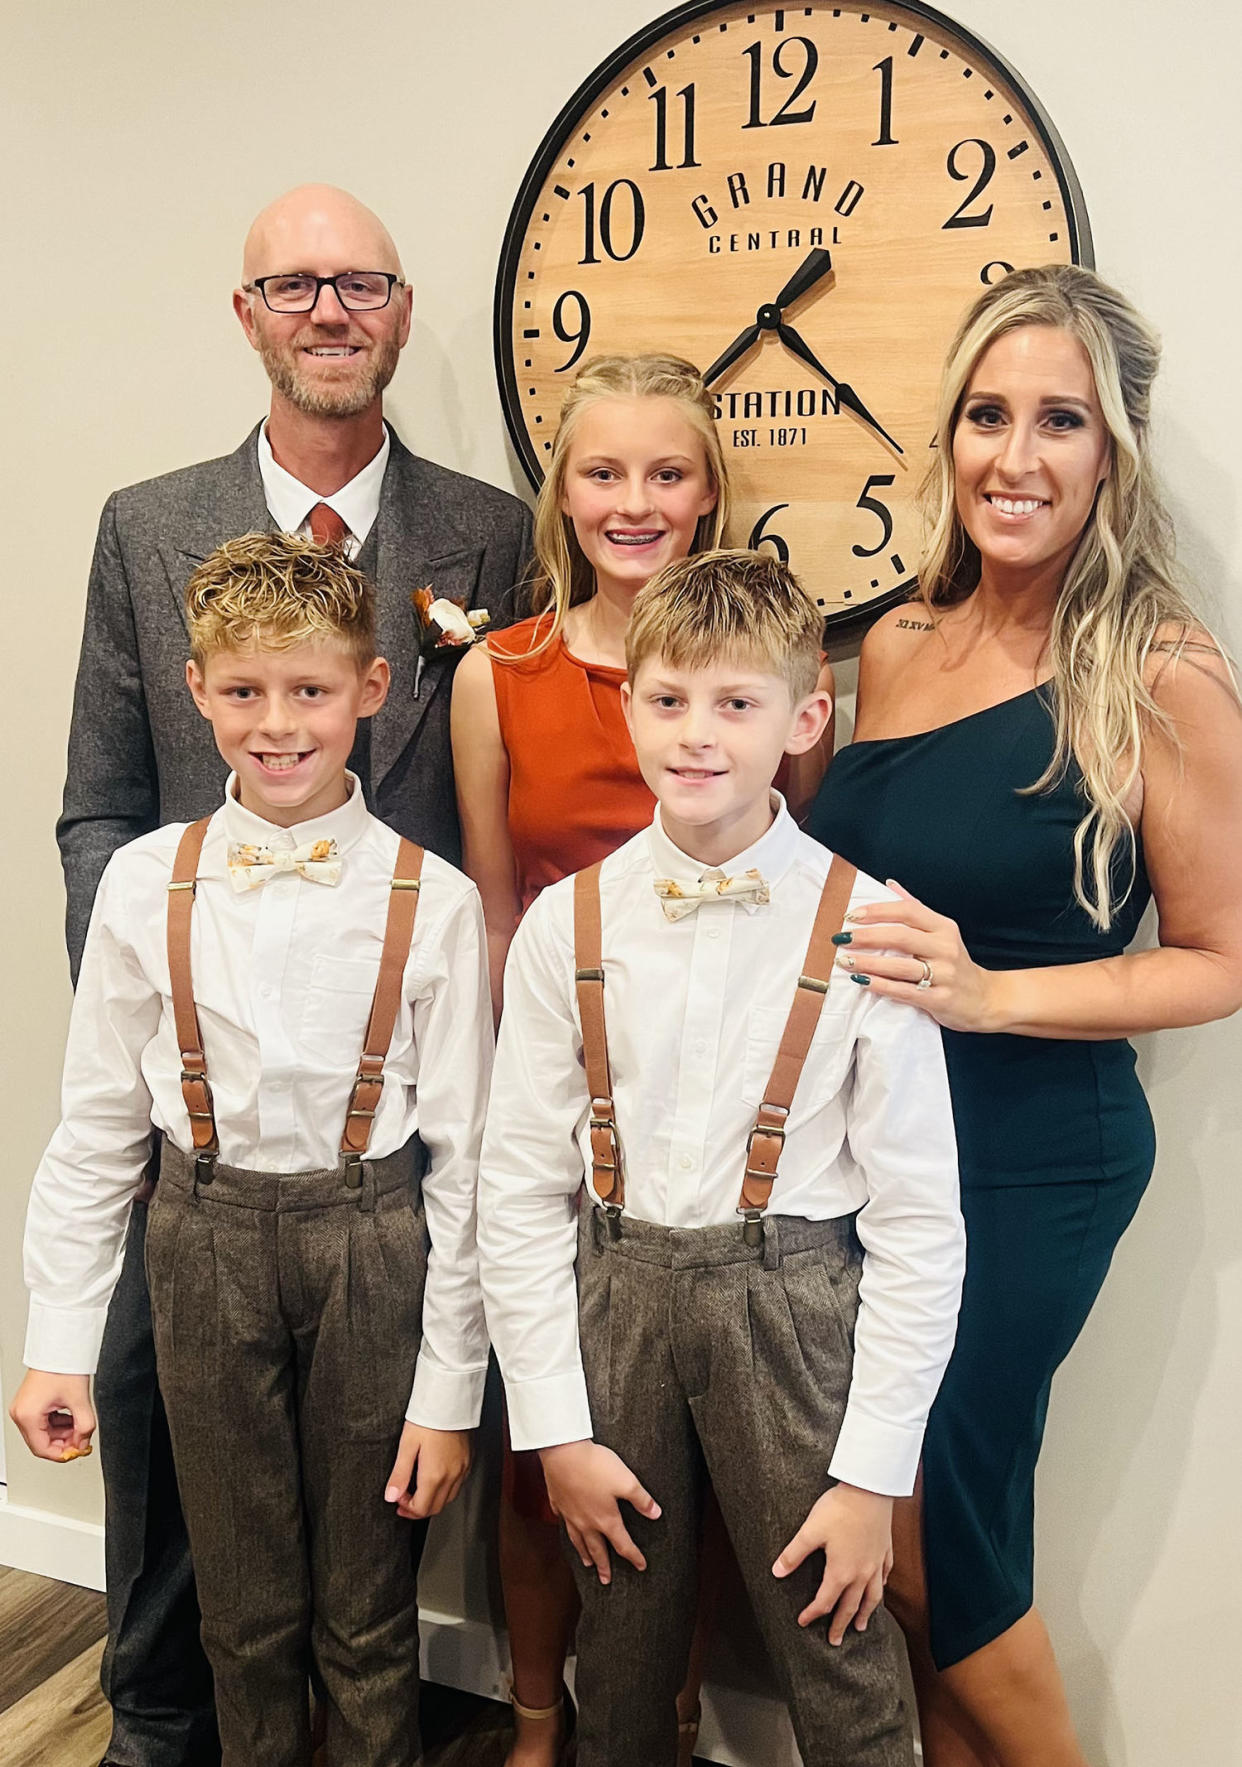 The Westfield family: Emily, her husband Max, their daughter Mckenna and sons Jack (right) and Charlie (left). (Courtesy Emily Westerfield)